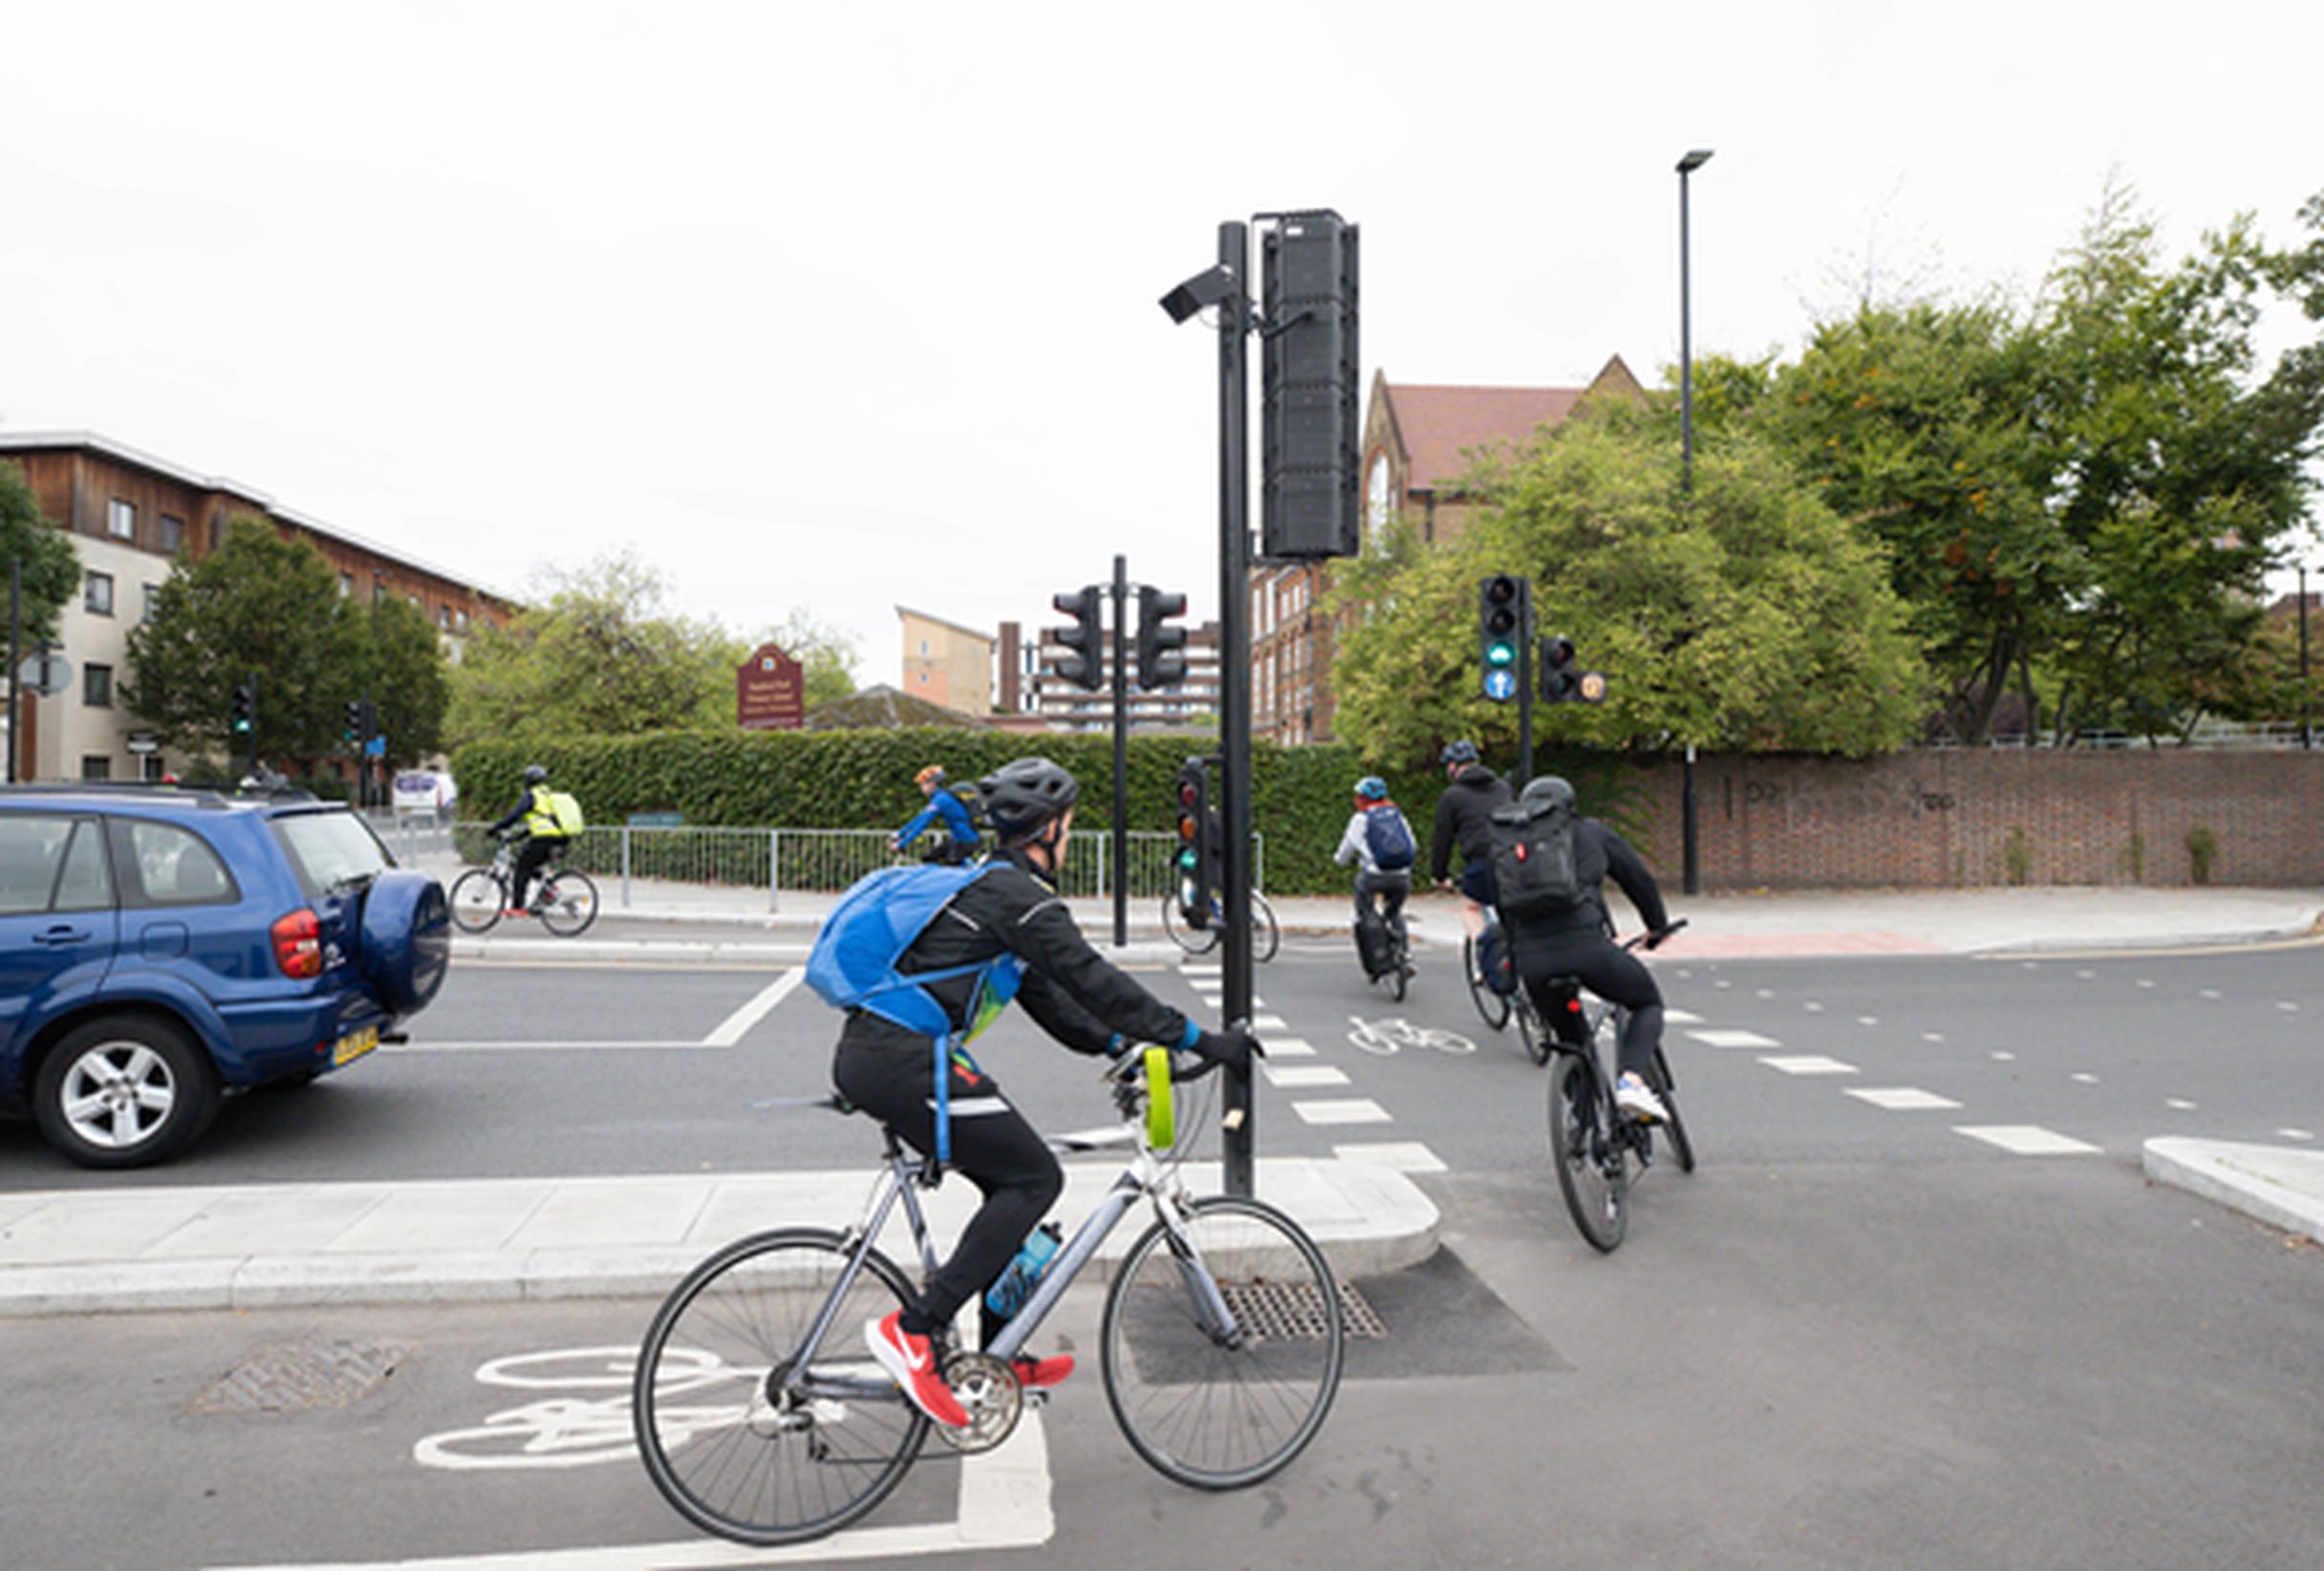 TfL will complete cycleways currently under construction and begin work on up to 14km of additional sections